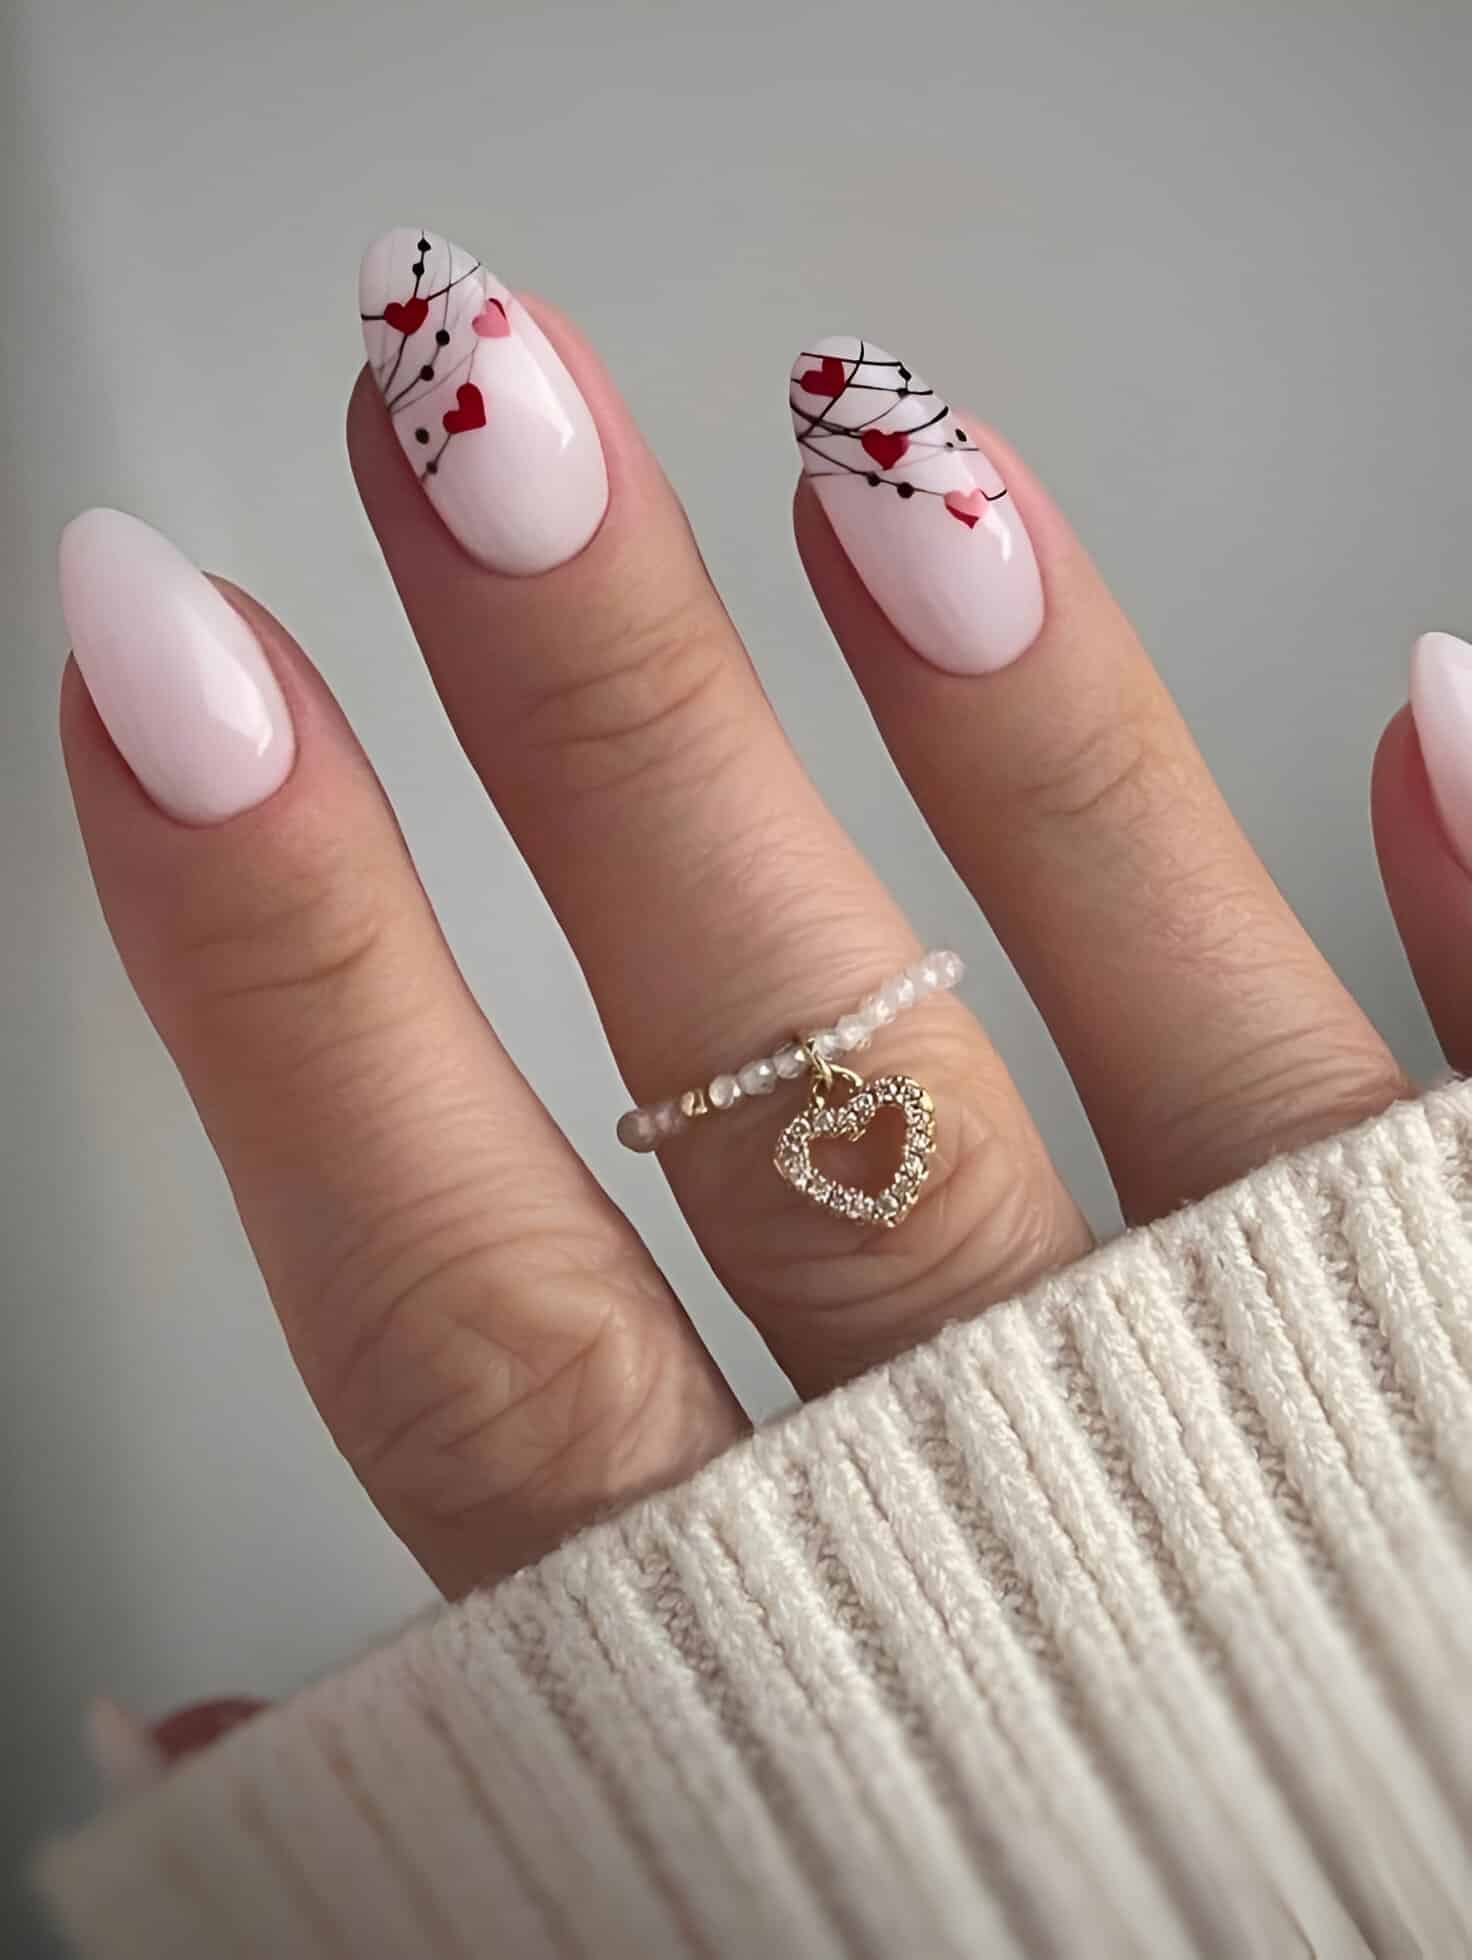 30 Irresistible Red Heart Nails For The Perfect Romantic Date 2